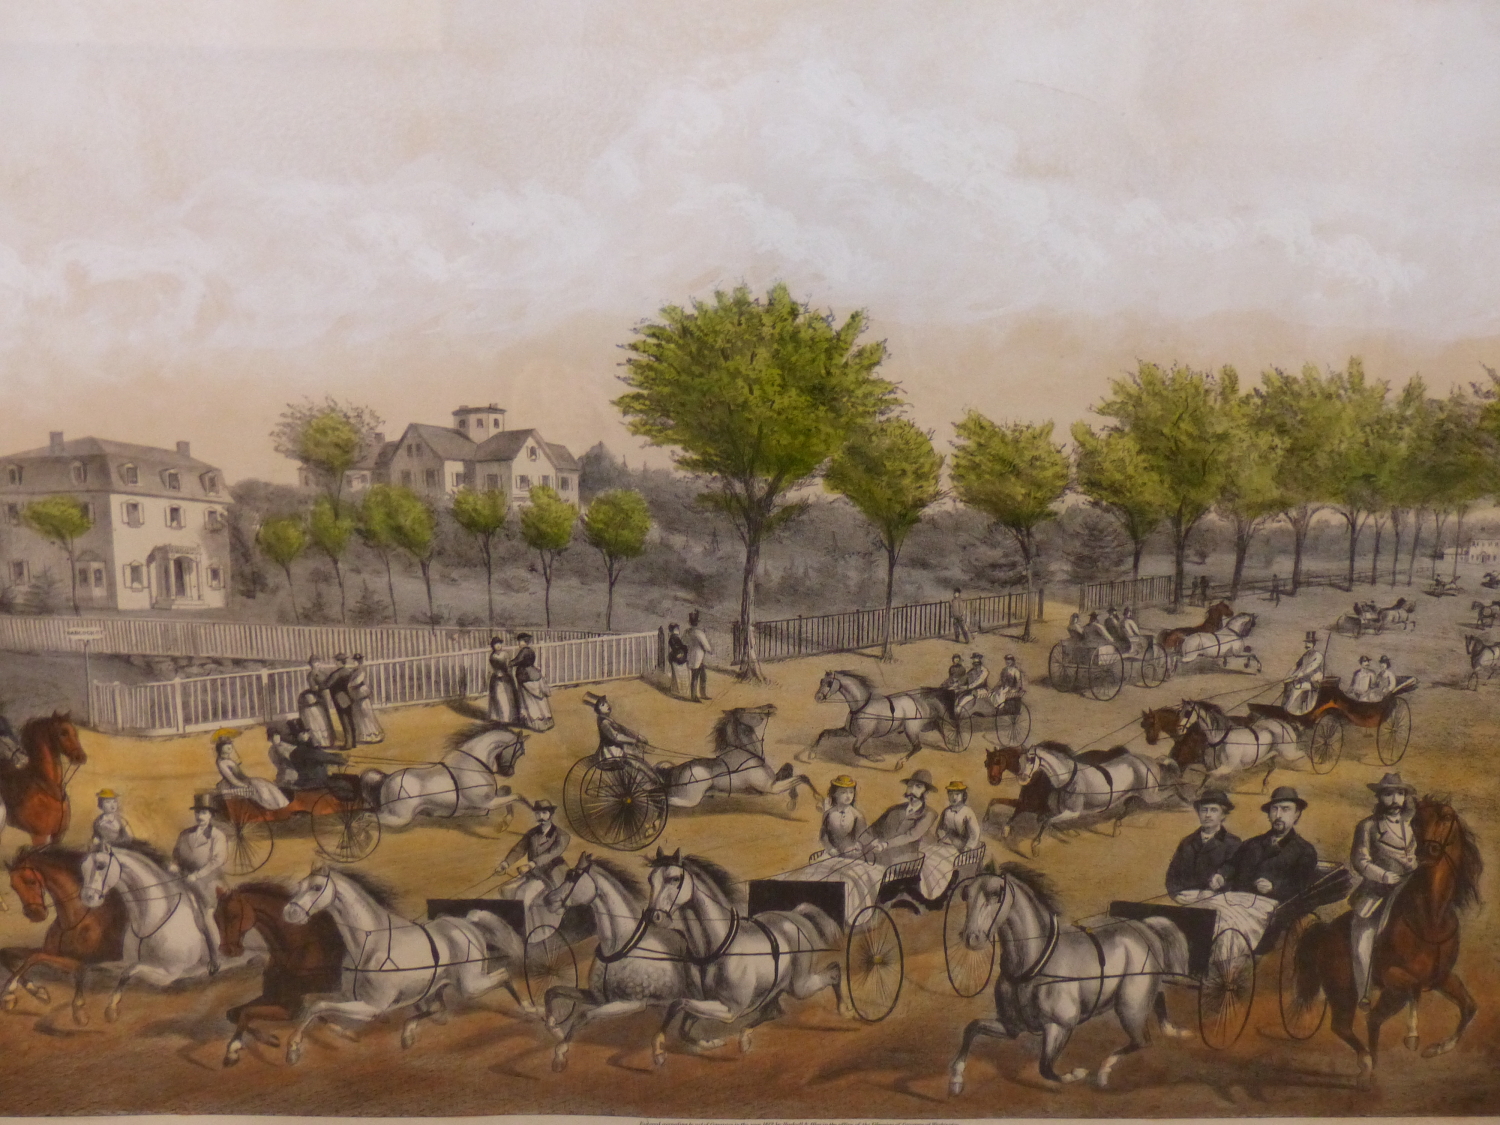 TROTTING CRACKS ON THE BRIGHTON ROAD (SCENE, MILE GROUND), 19TH CENTURY AMERICAN LITHOGRAPH WITH